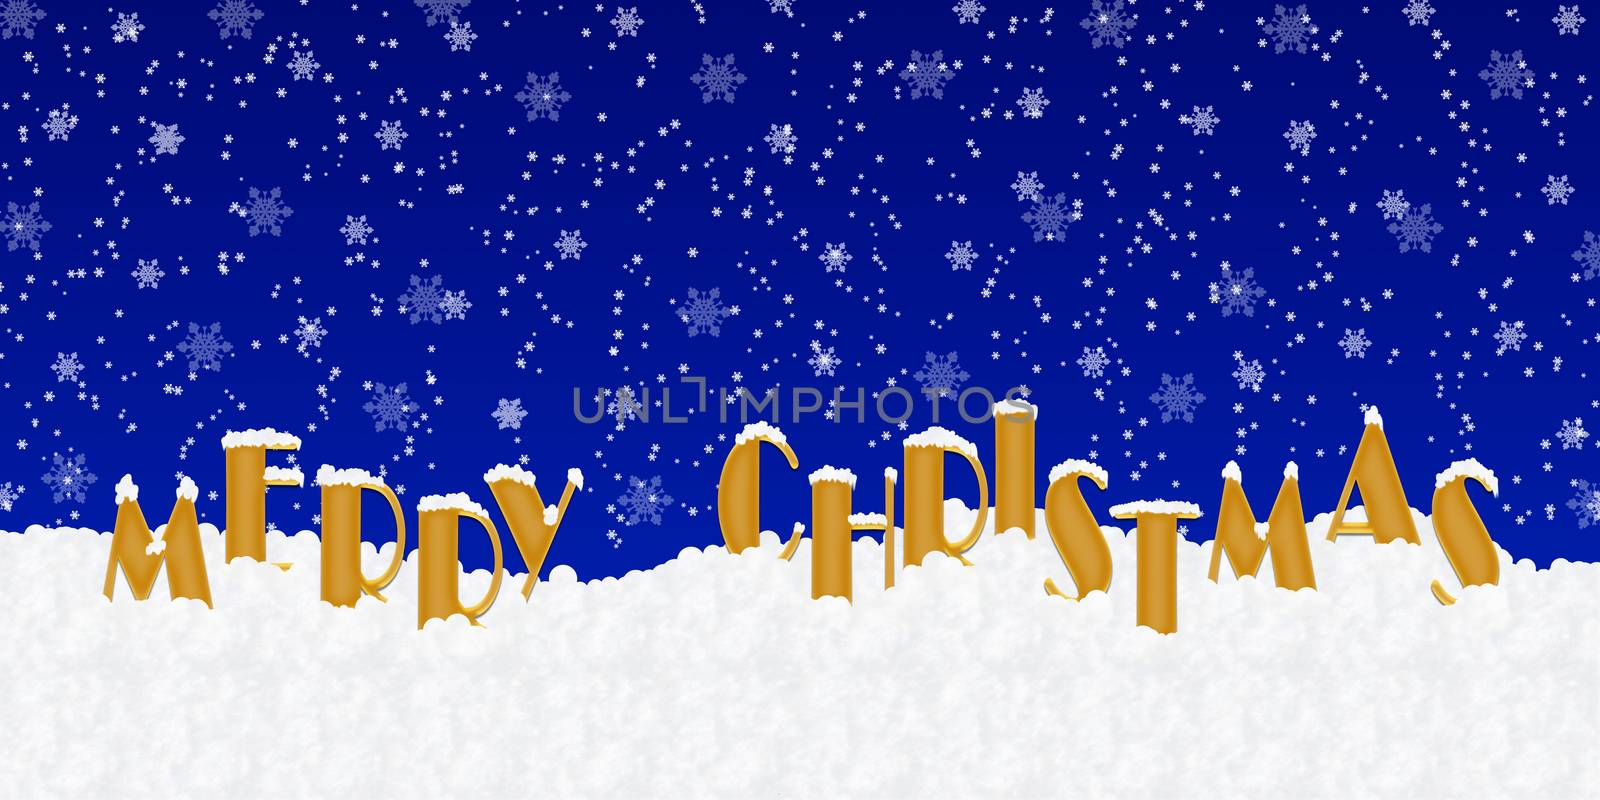 Blank for Christmas greetings with letters on snow and blue Christmas background